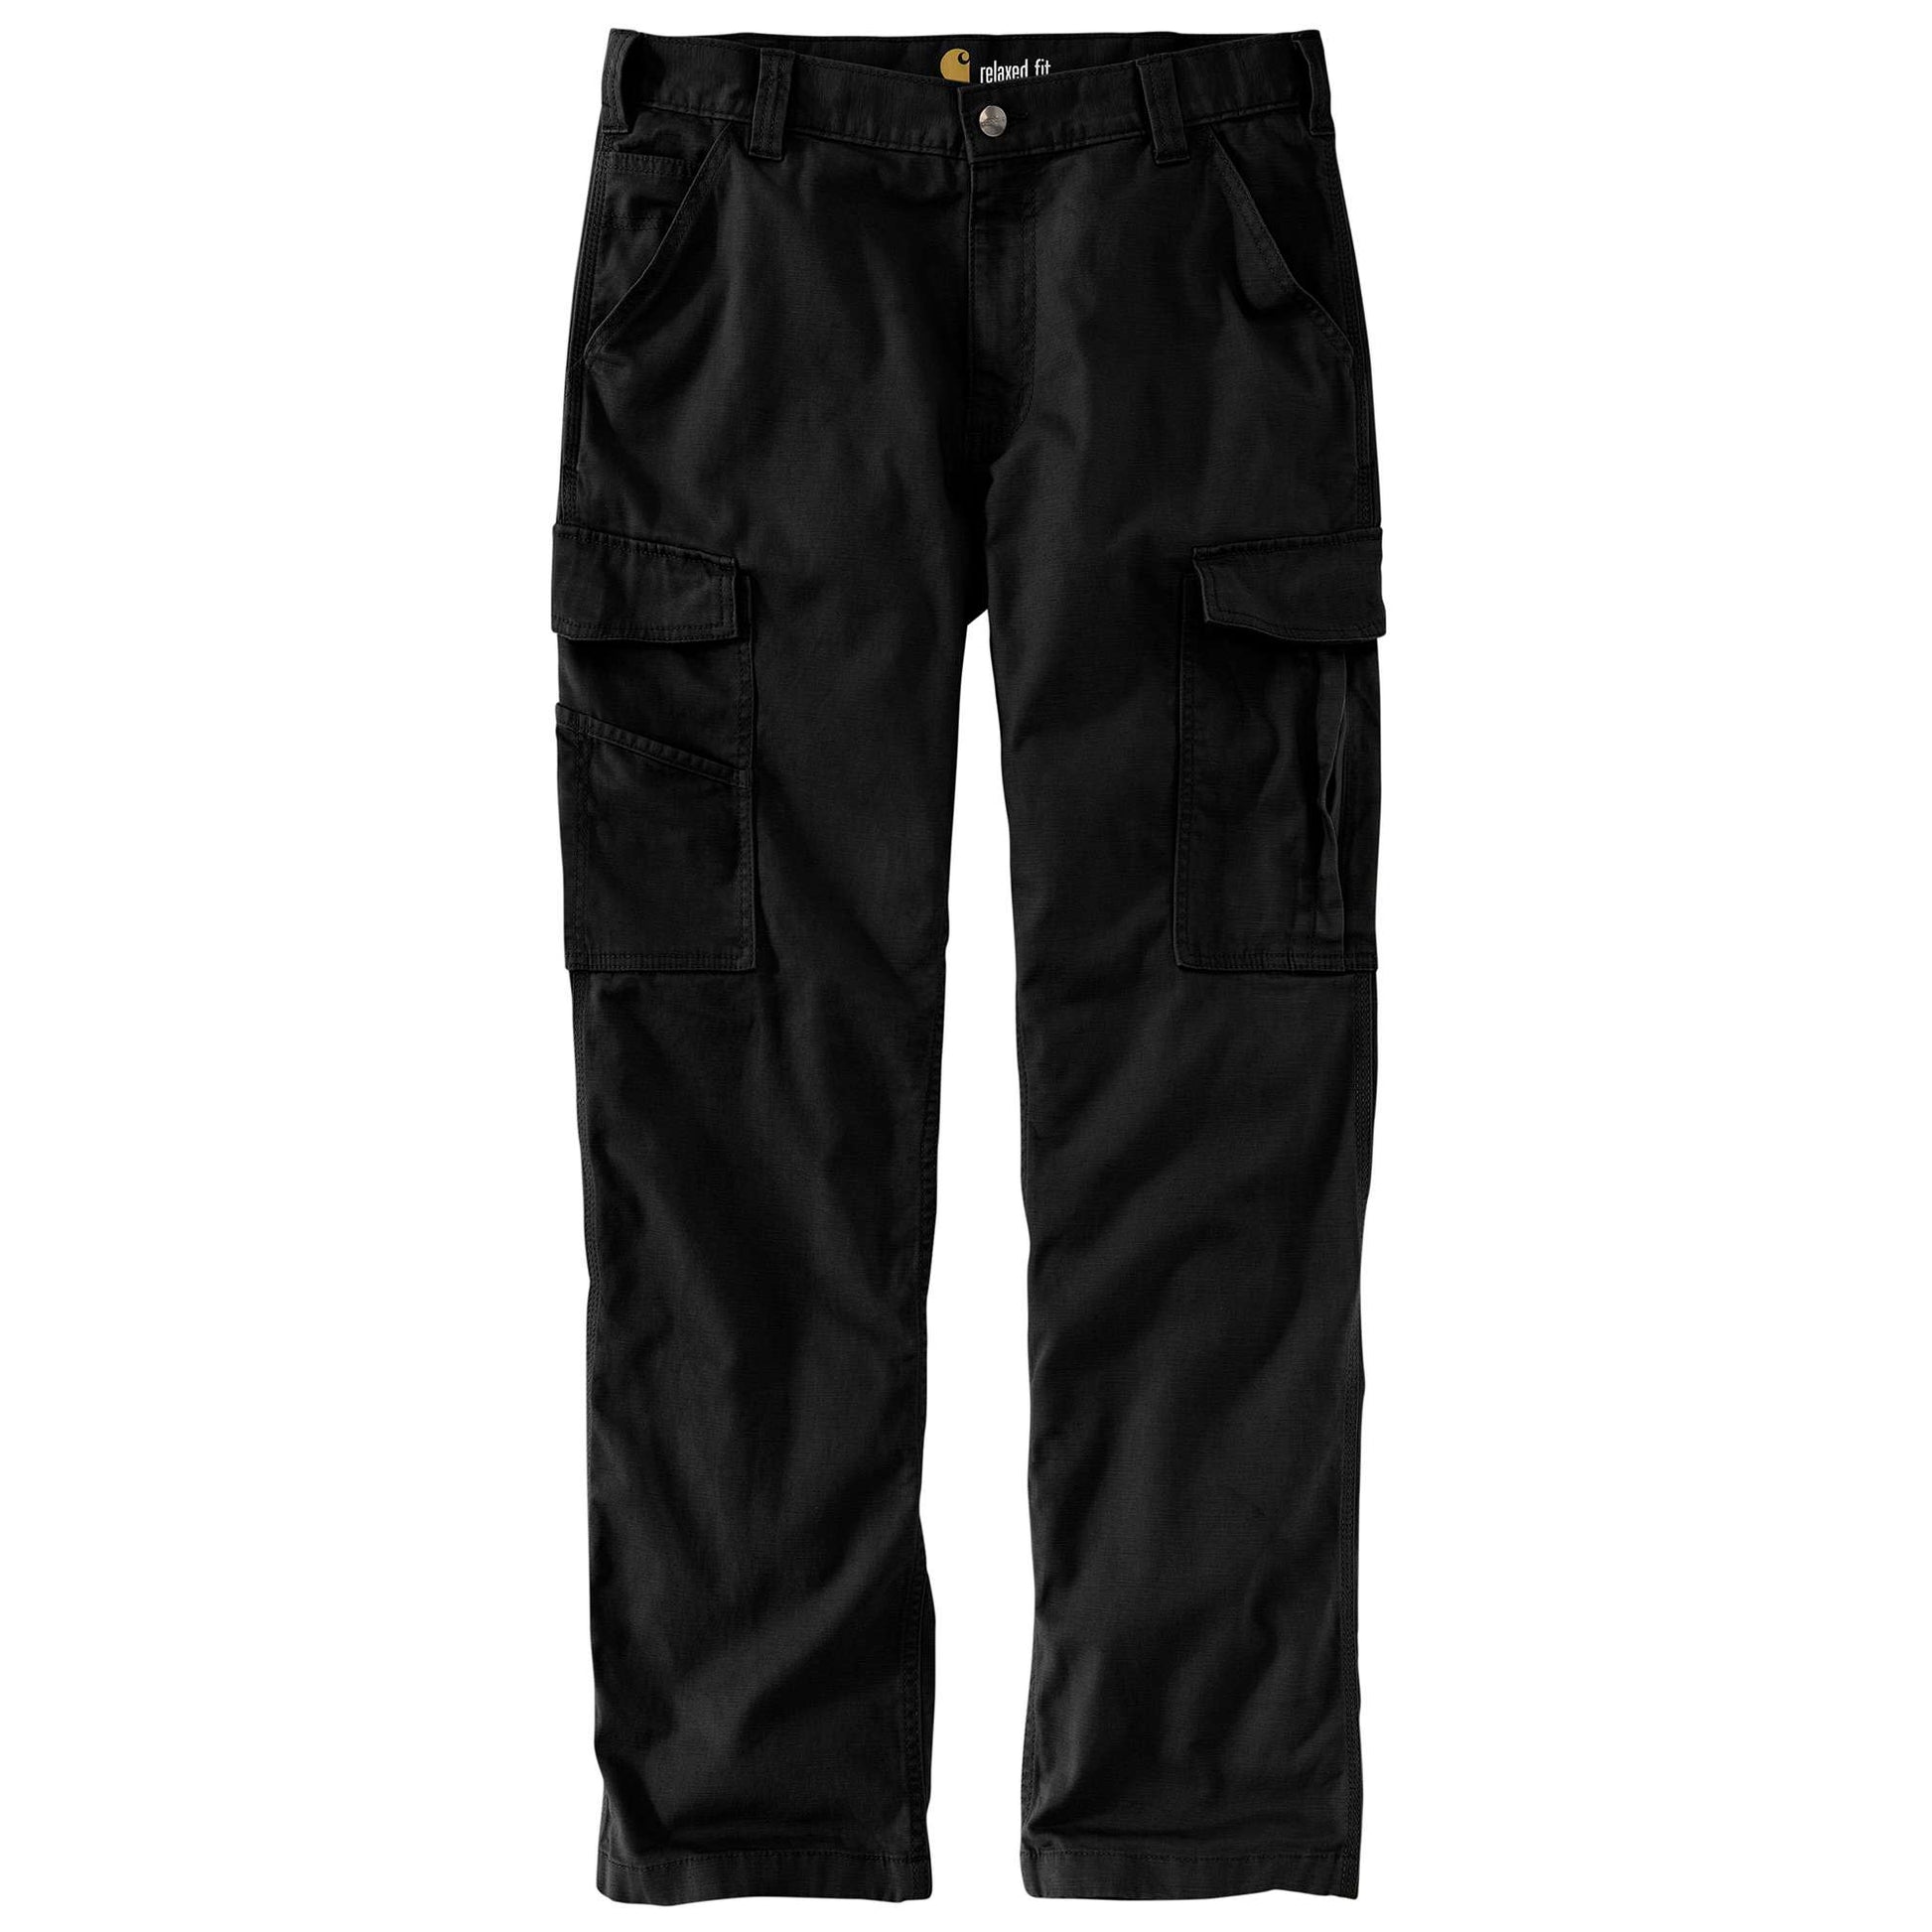 Men's Rugged Flex Relaxed Fit Duck Utility Work Pant - Black